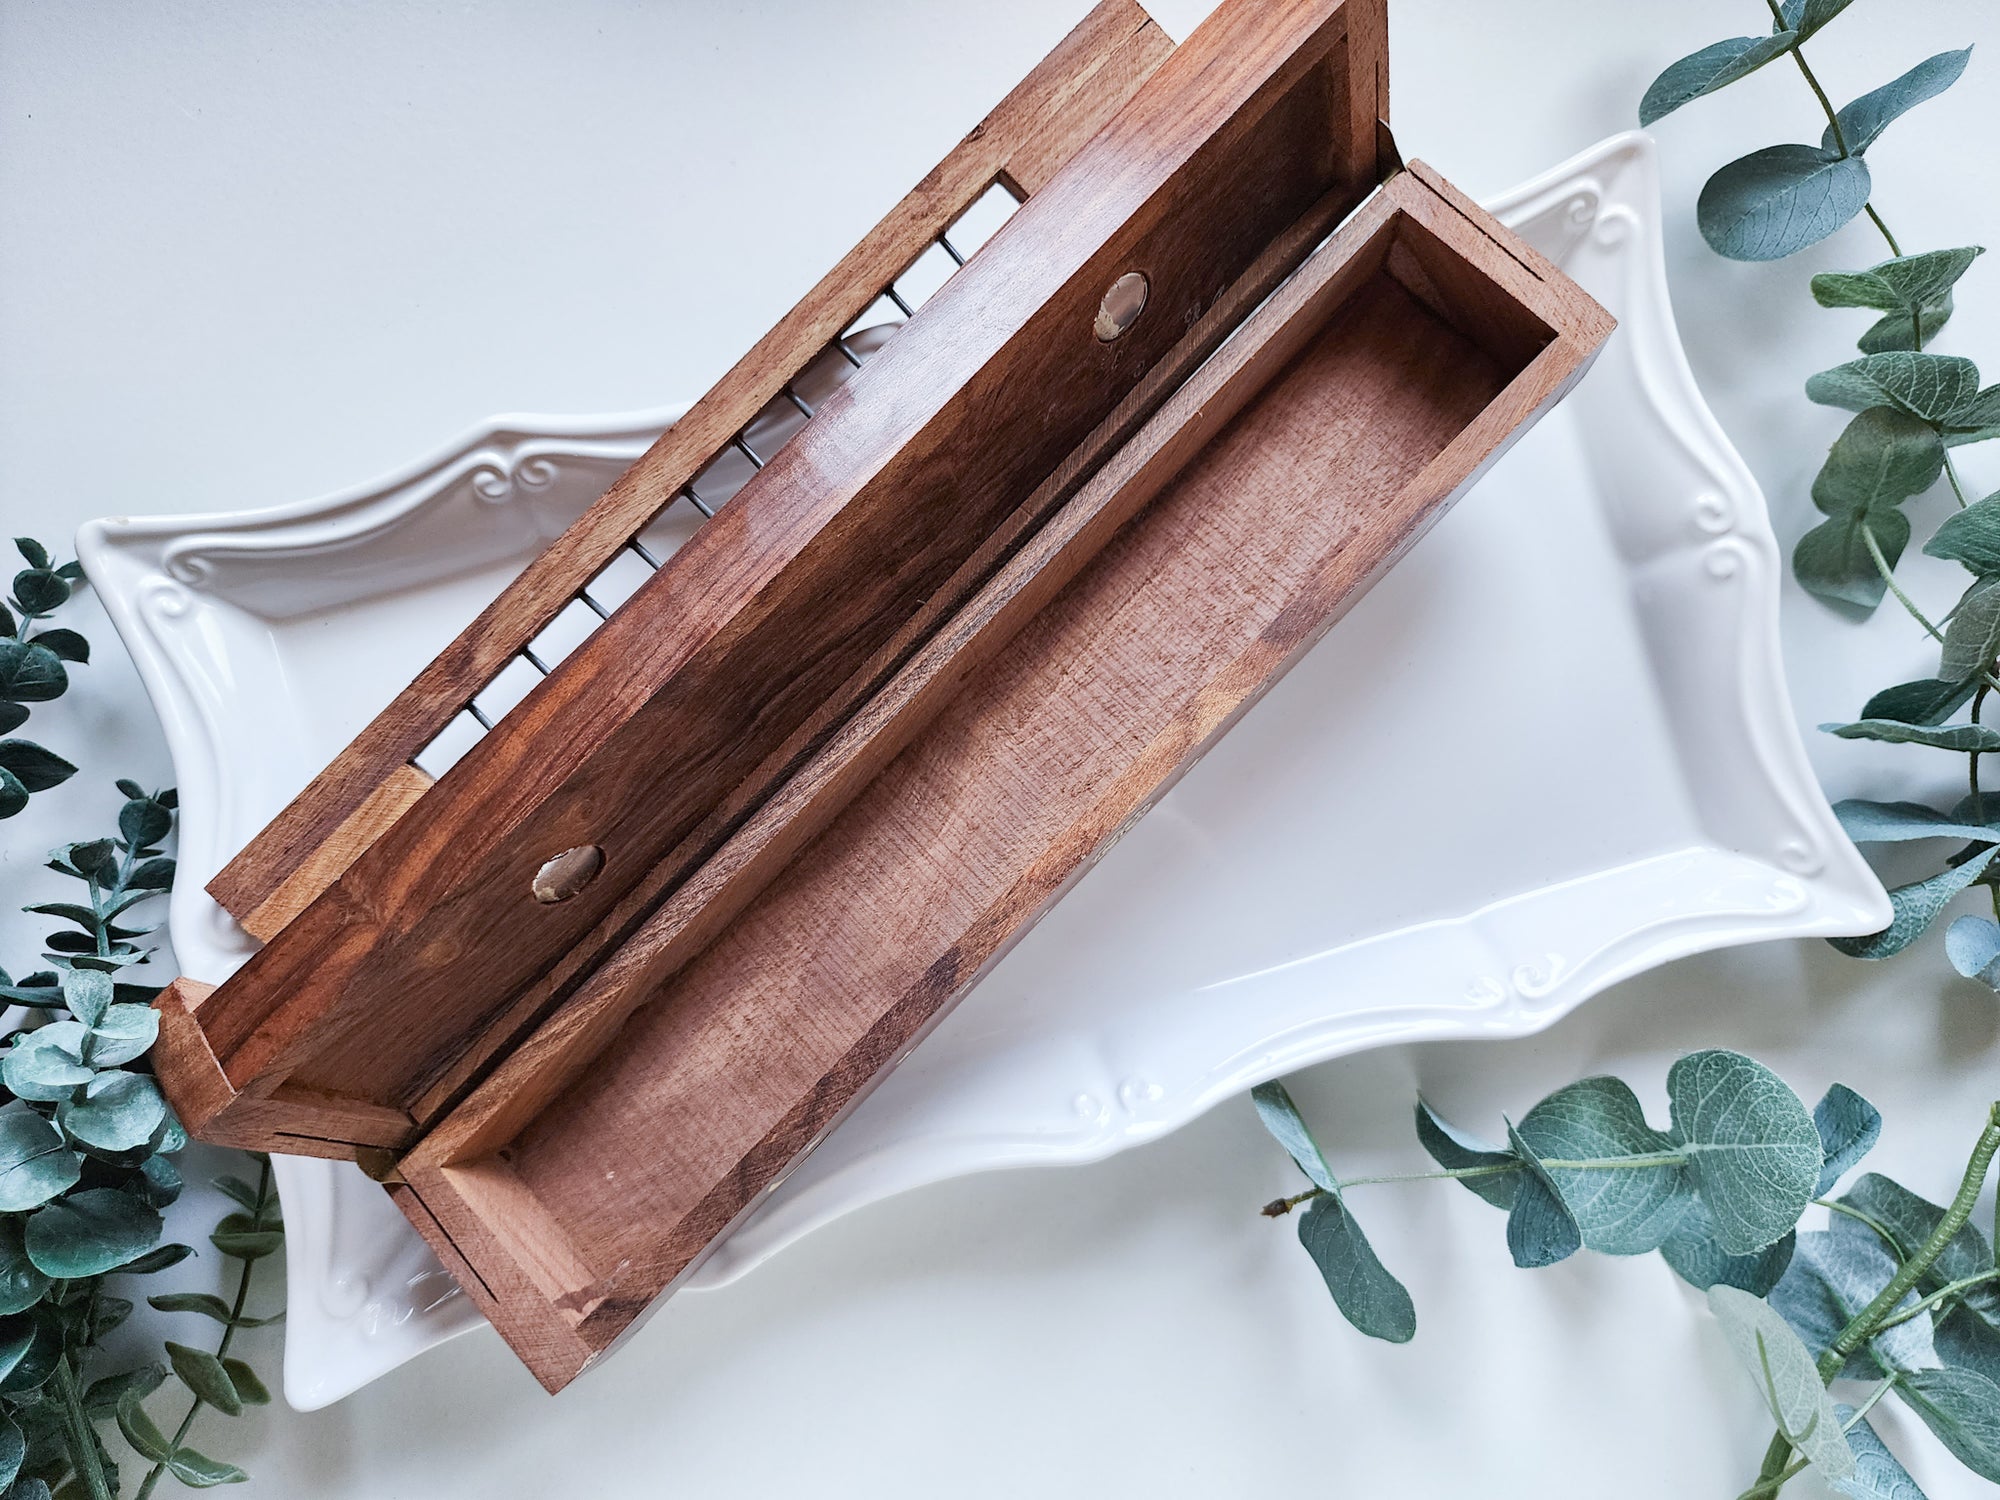 Celestial All-in-One Wood Incense Box Burner